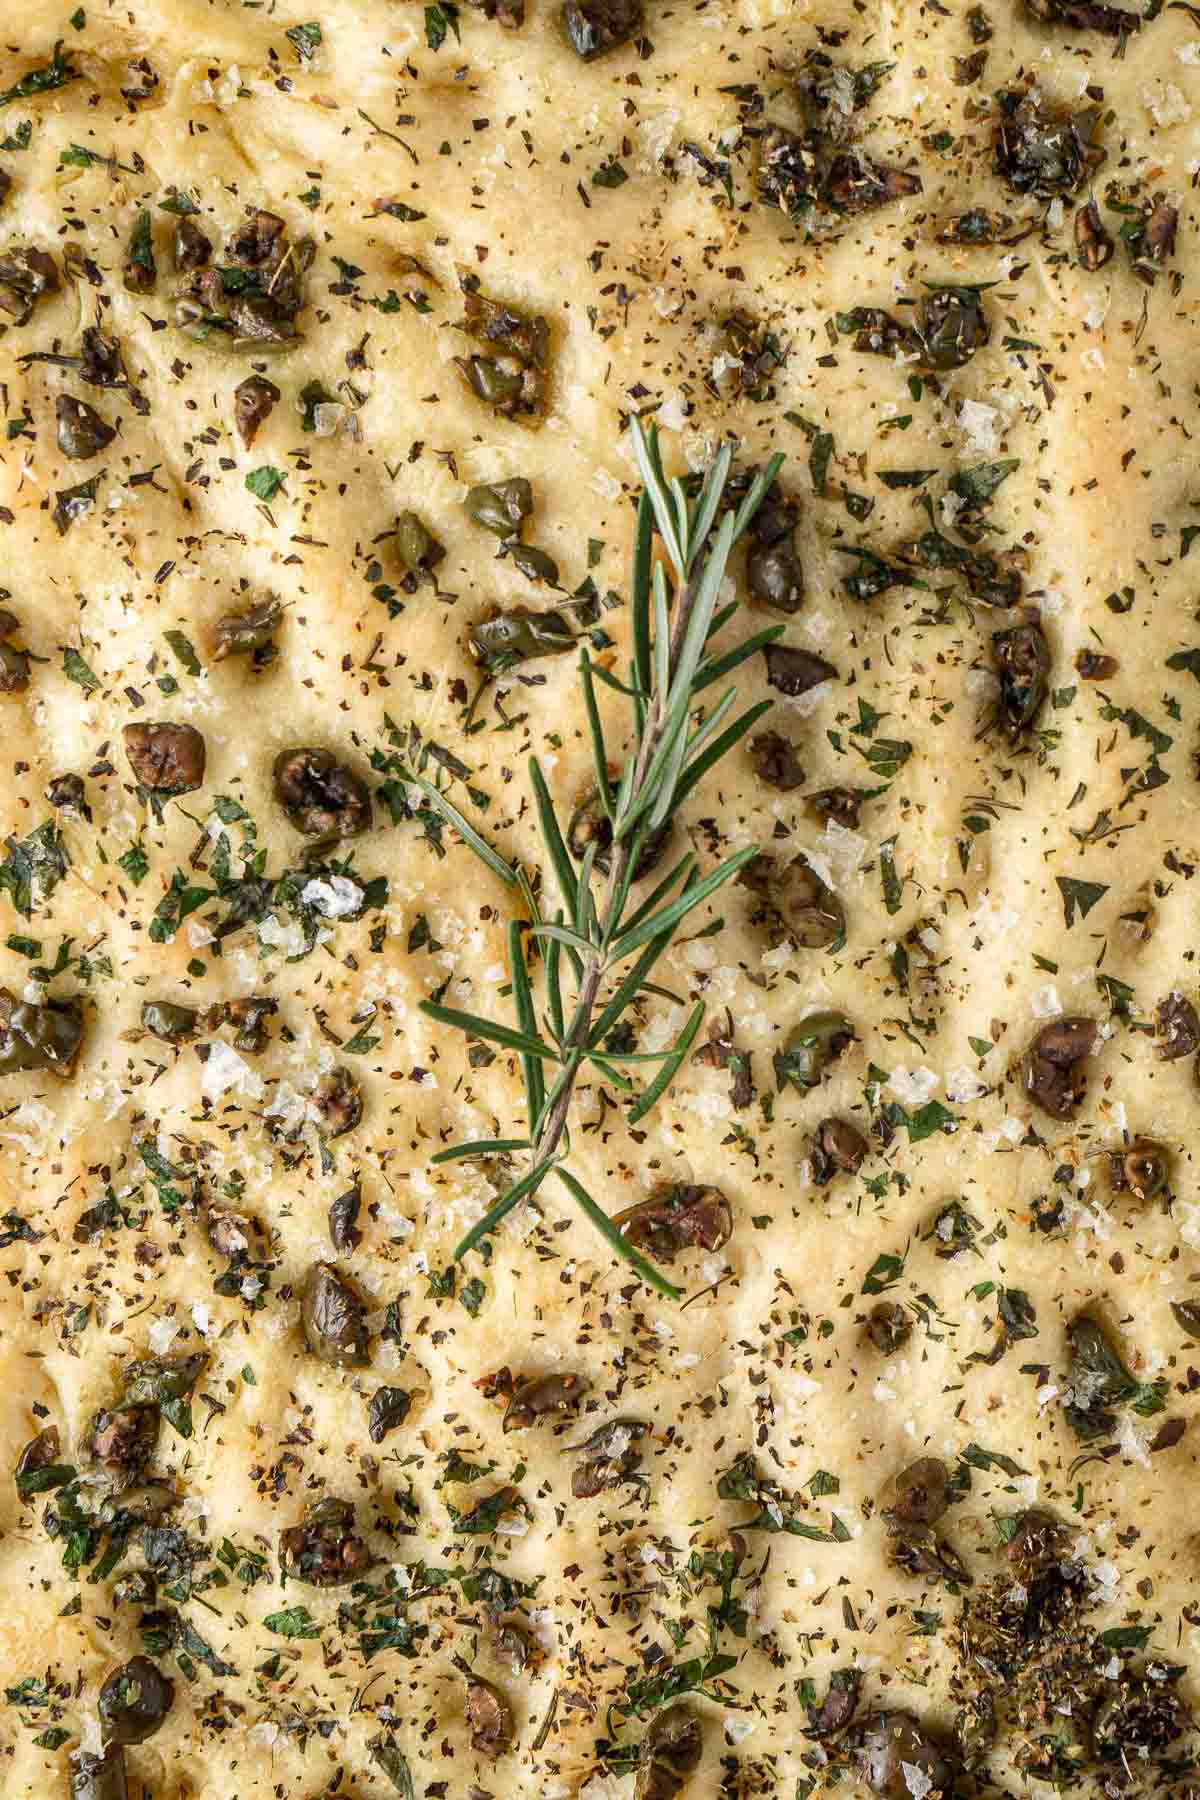 Close up of the olive and herb topping of the focaccia with a sprig of rosemary.